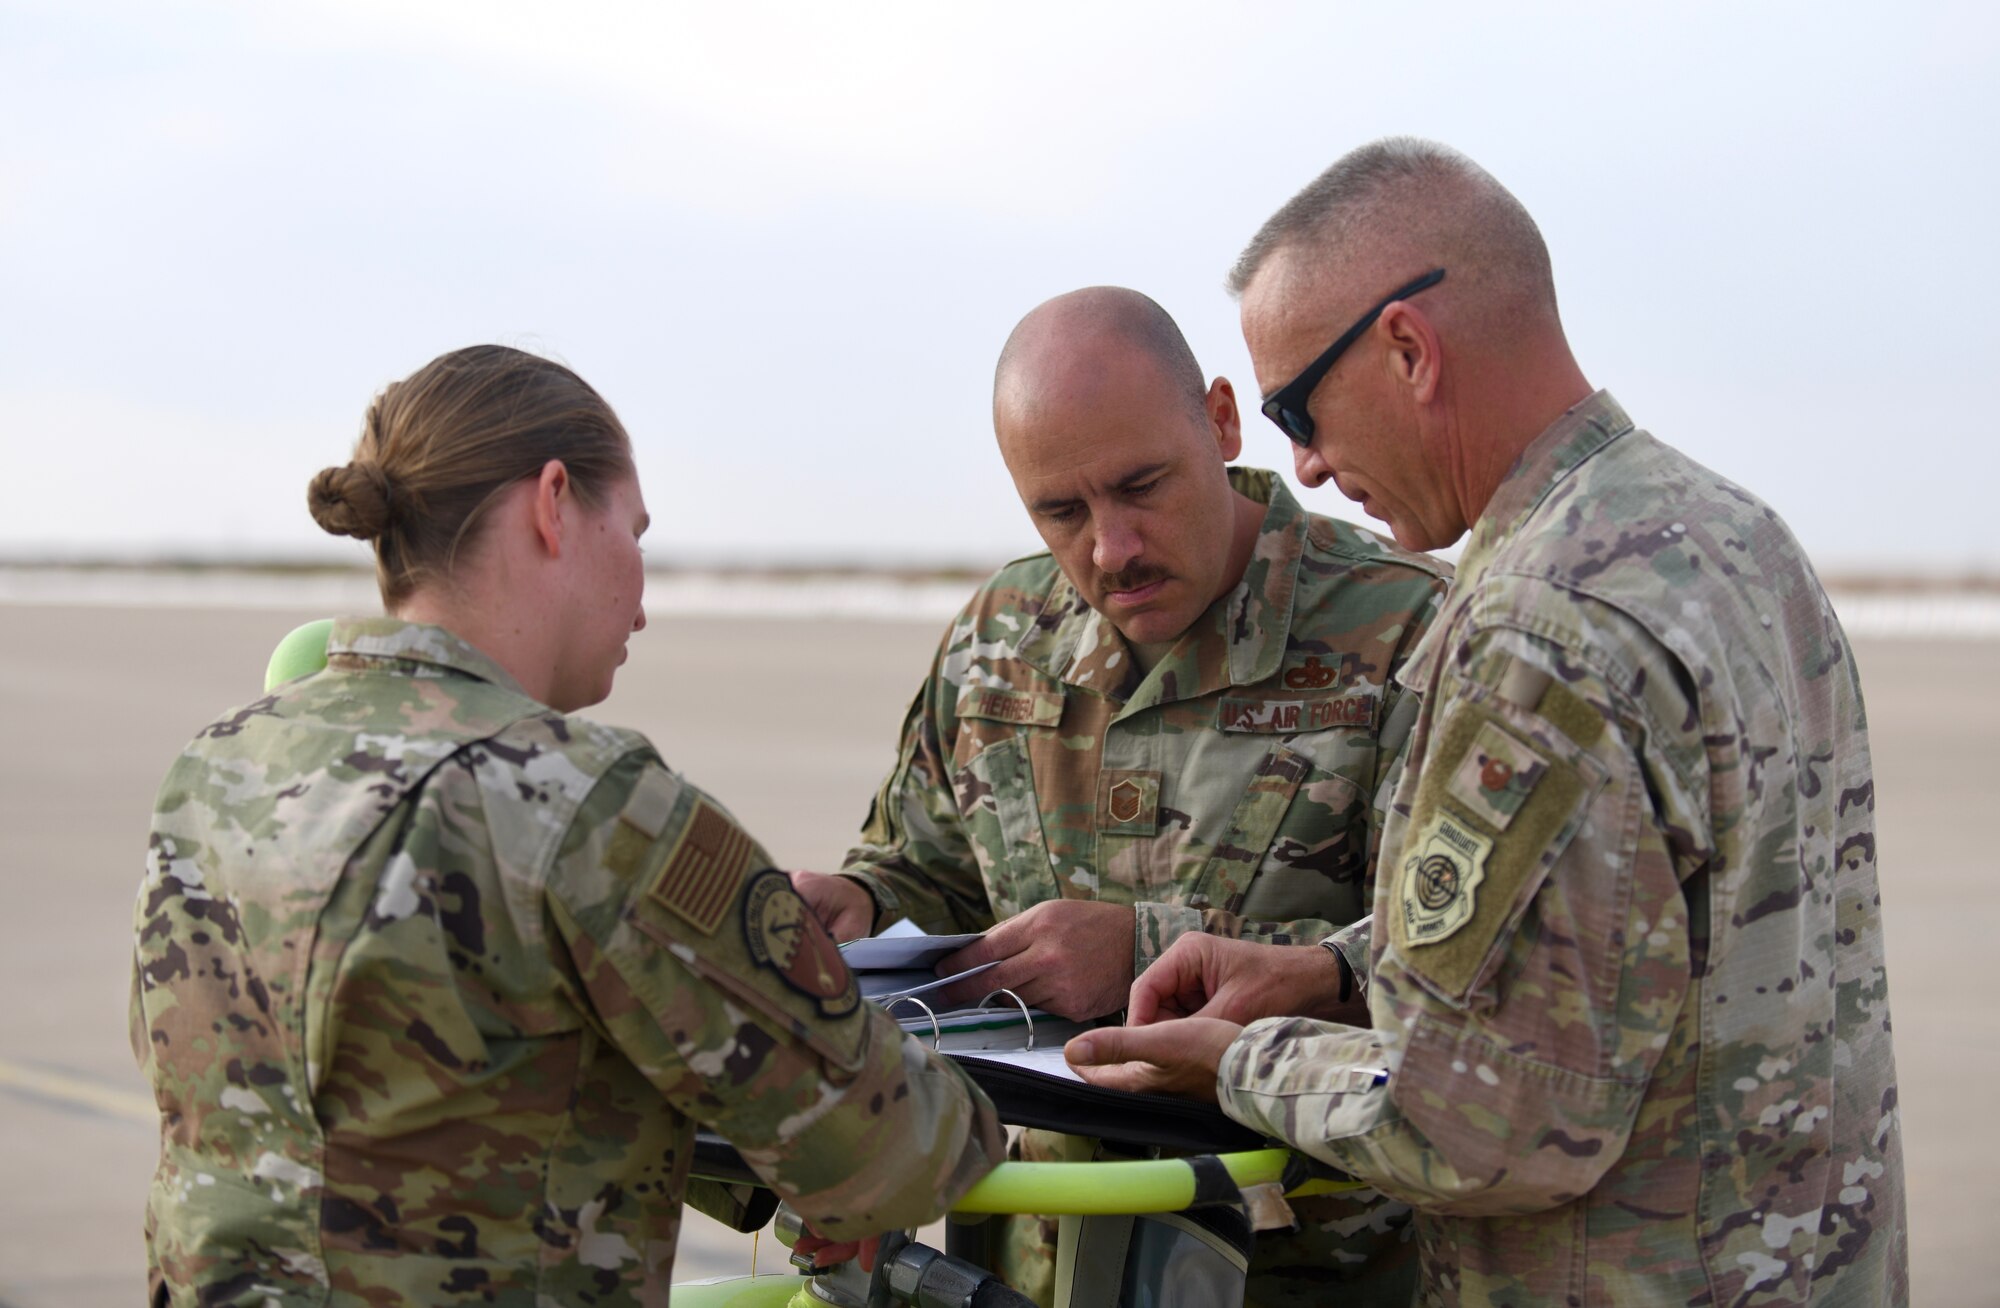 U.S. Air Force Col. Brady Wilkins, 378th  Maintenance Group commander, discusses operations with members of the 555th Expeditionary Aircraft Maintenance Unit Dec. 2, 2019, at Prince Sultan Air Base, Saudi Arabia.